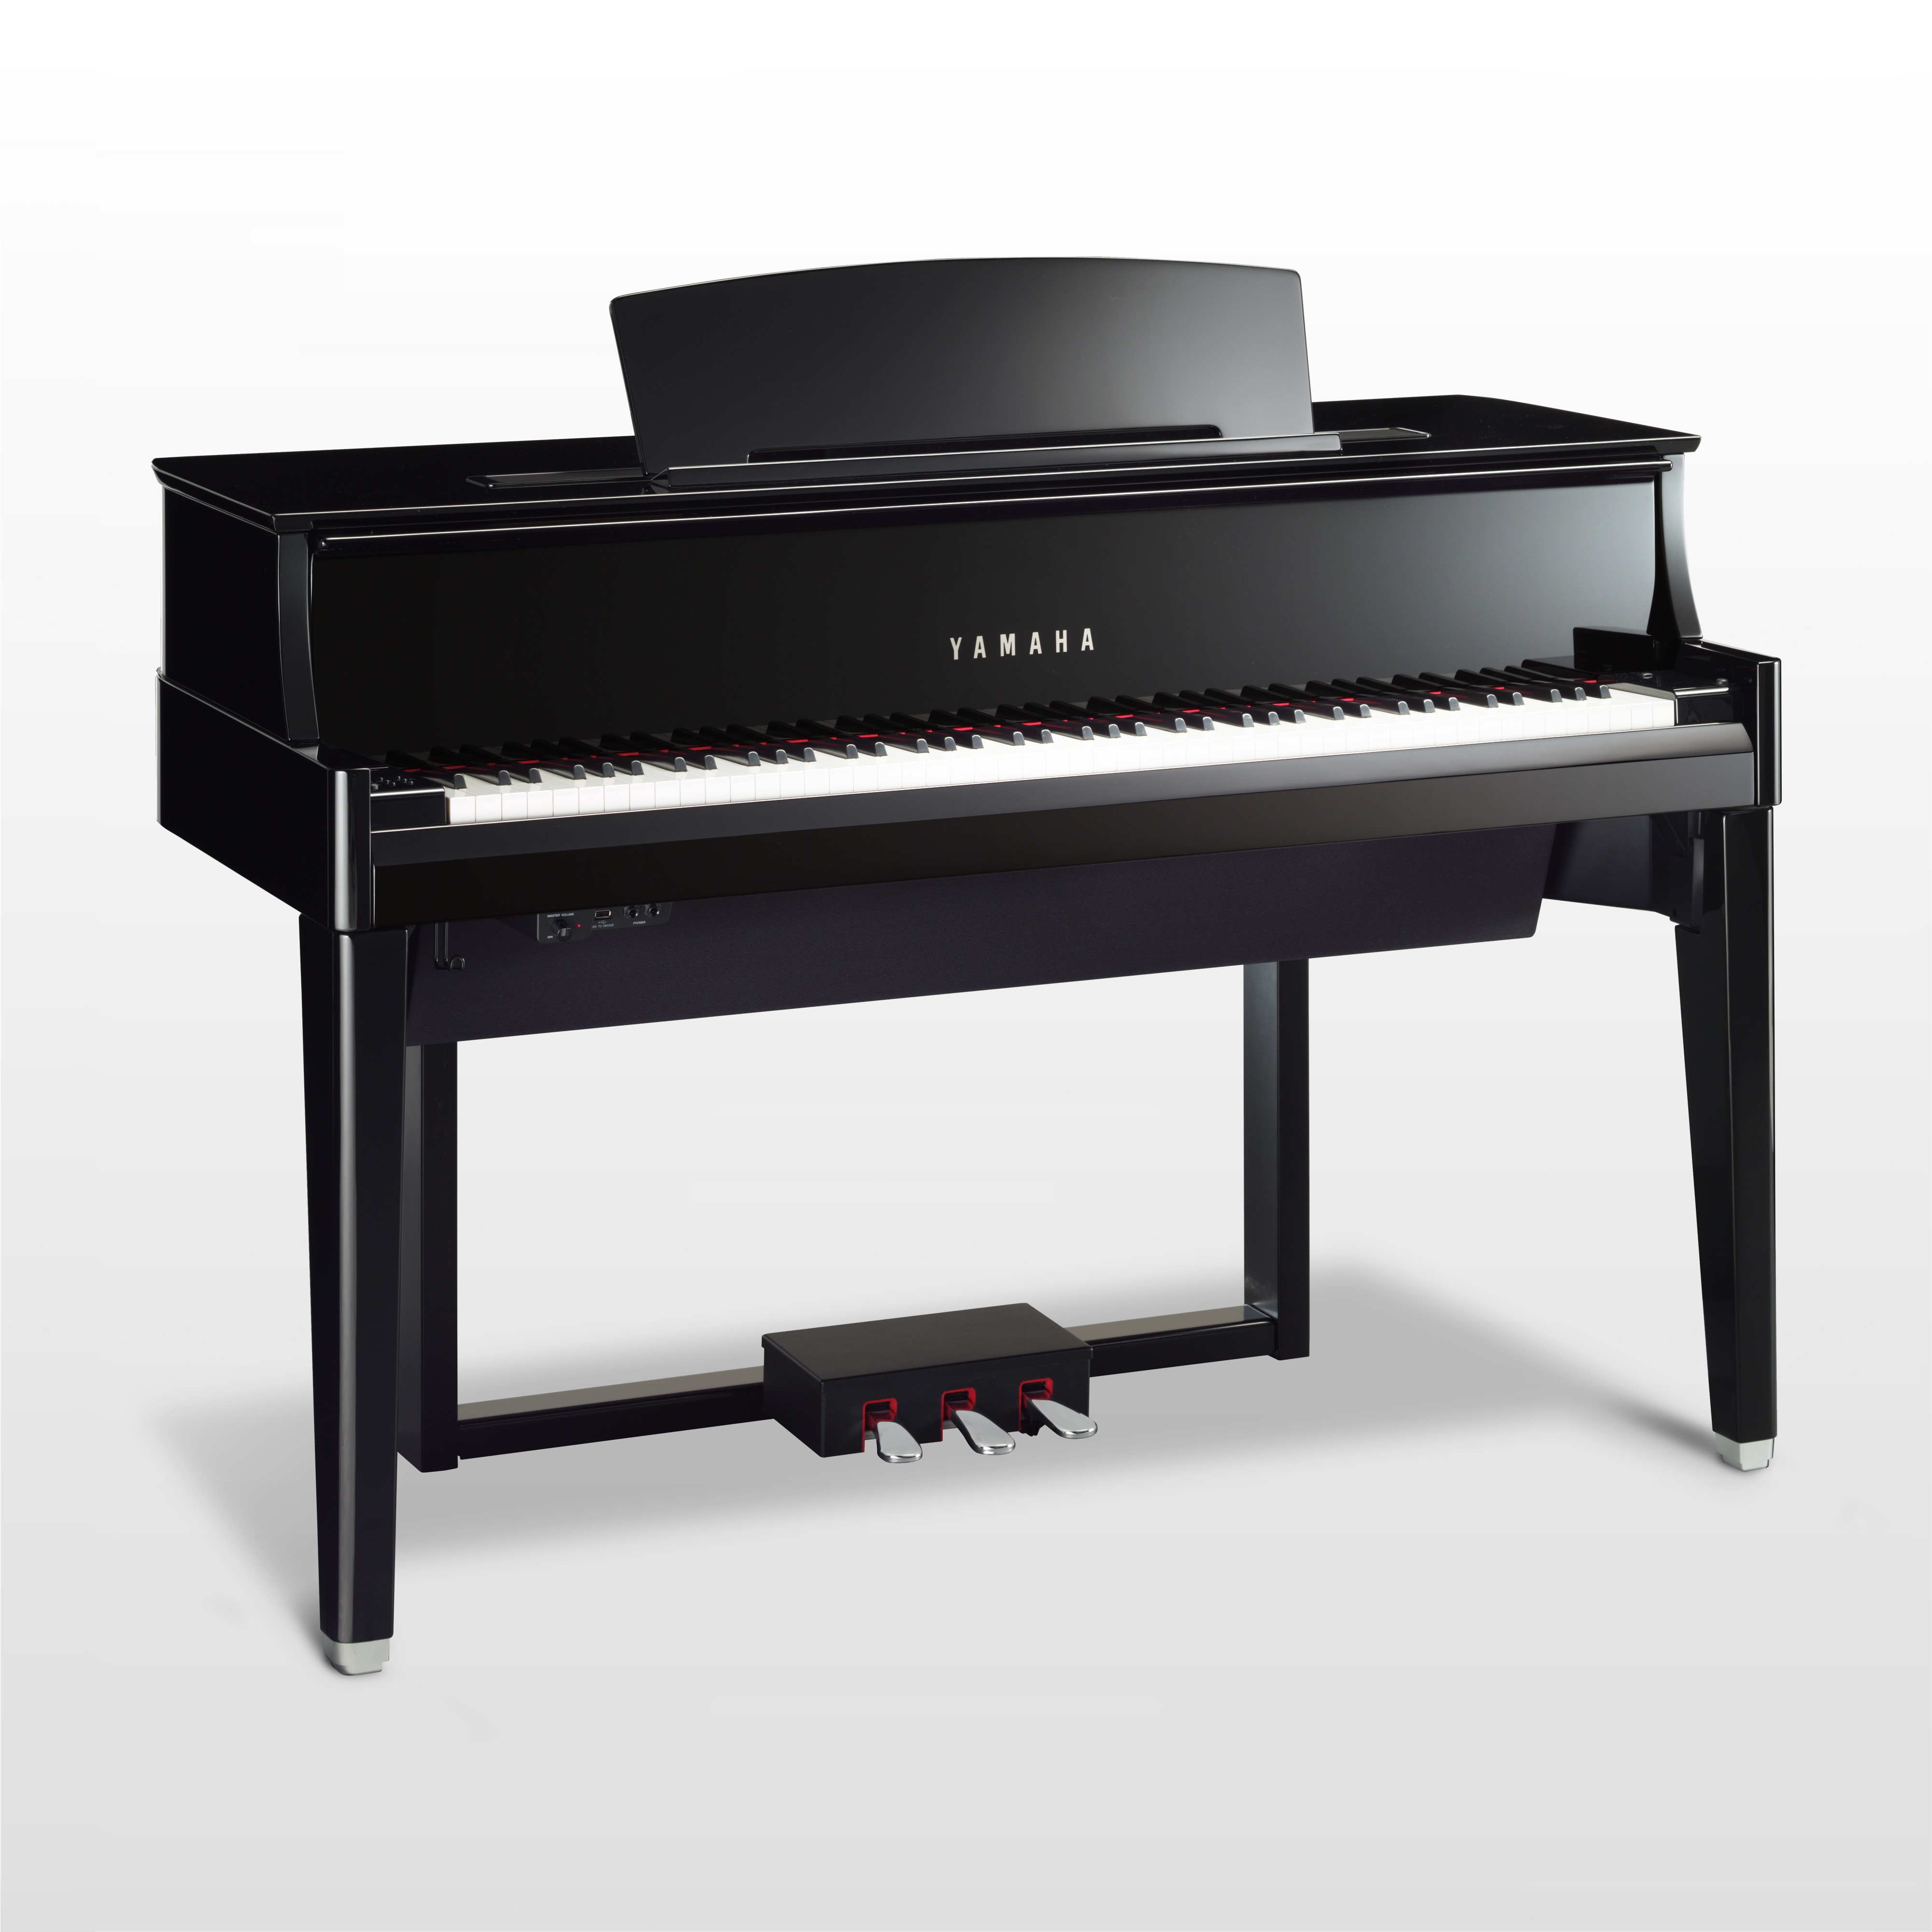 N1X - Specs - AvantGrand - Pianos - Musical Instruments - Products ...